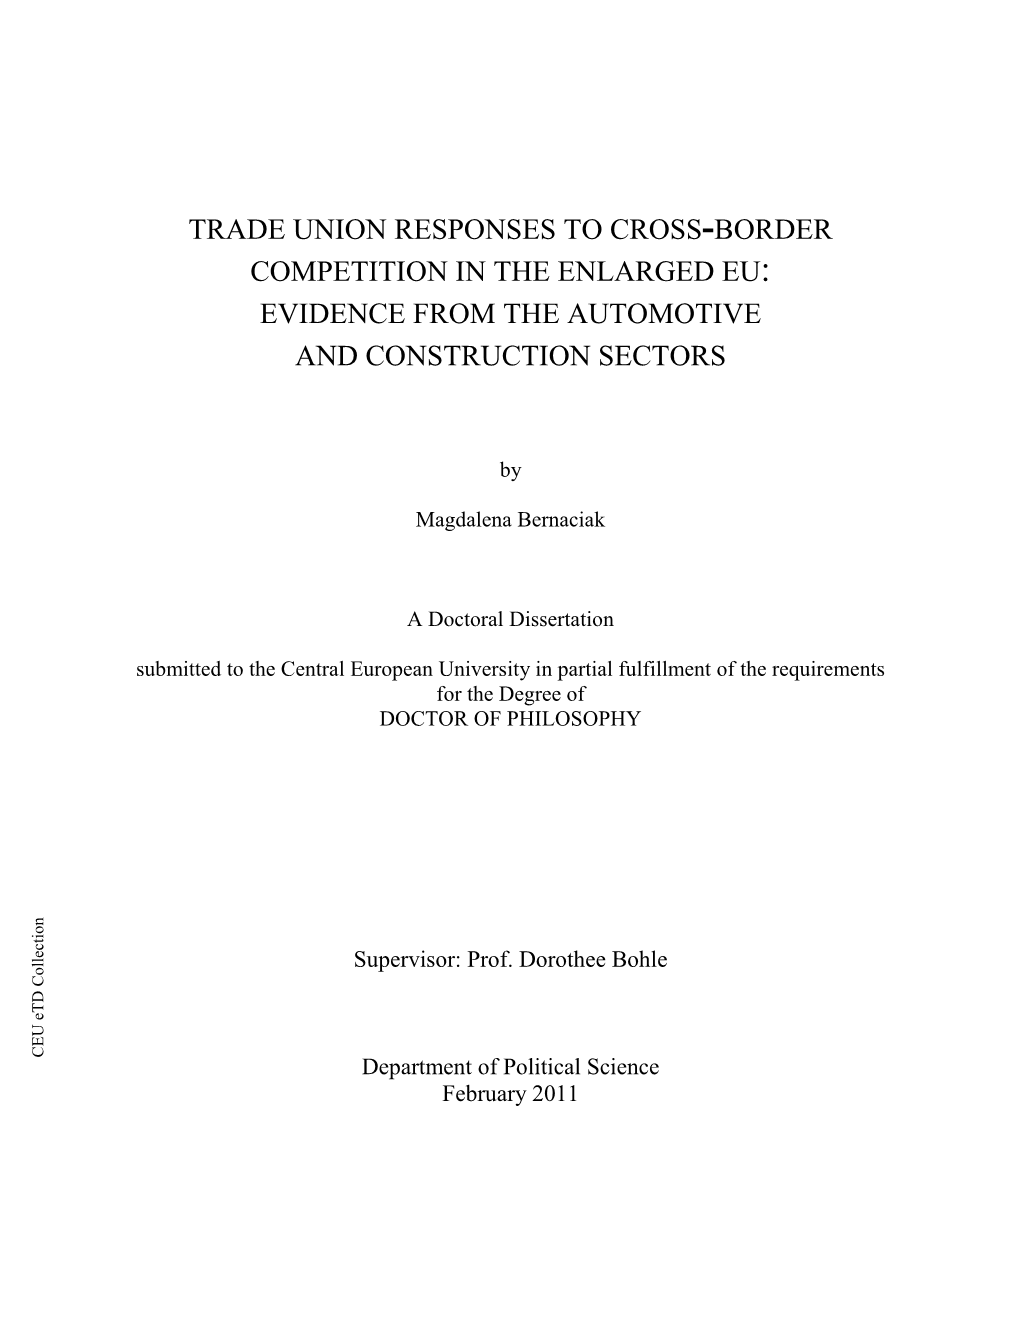 Trade Union Responses to Crossborder Competition